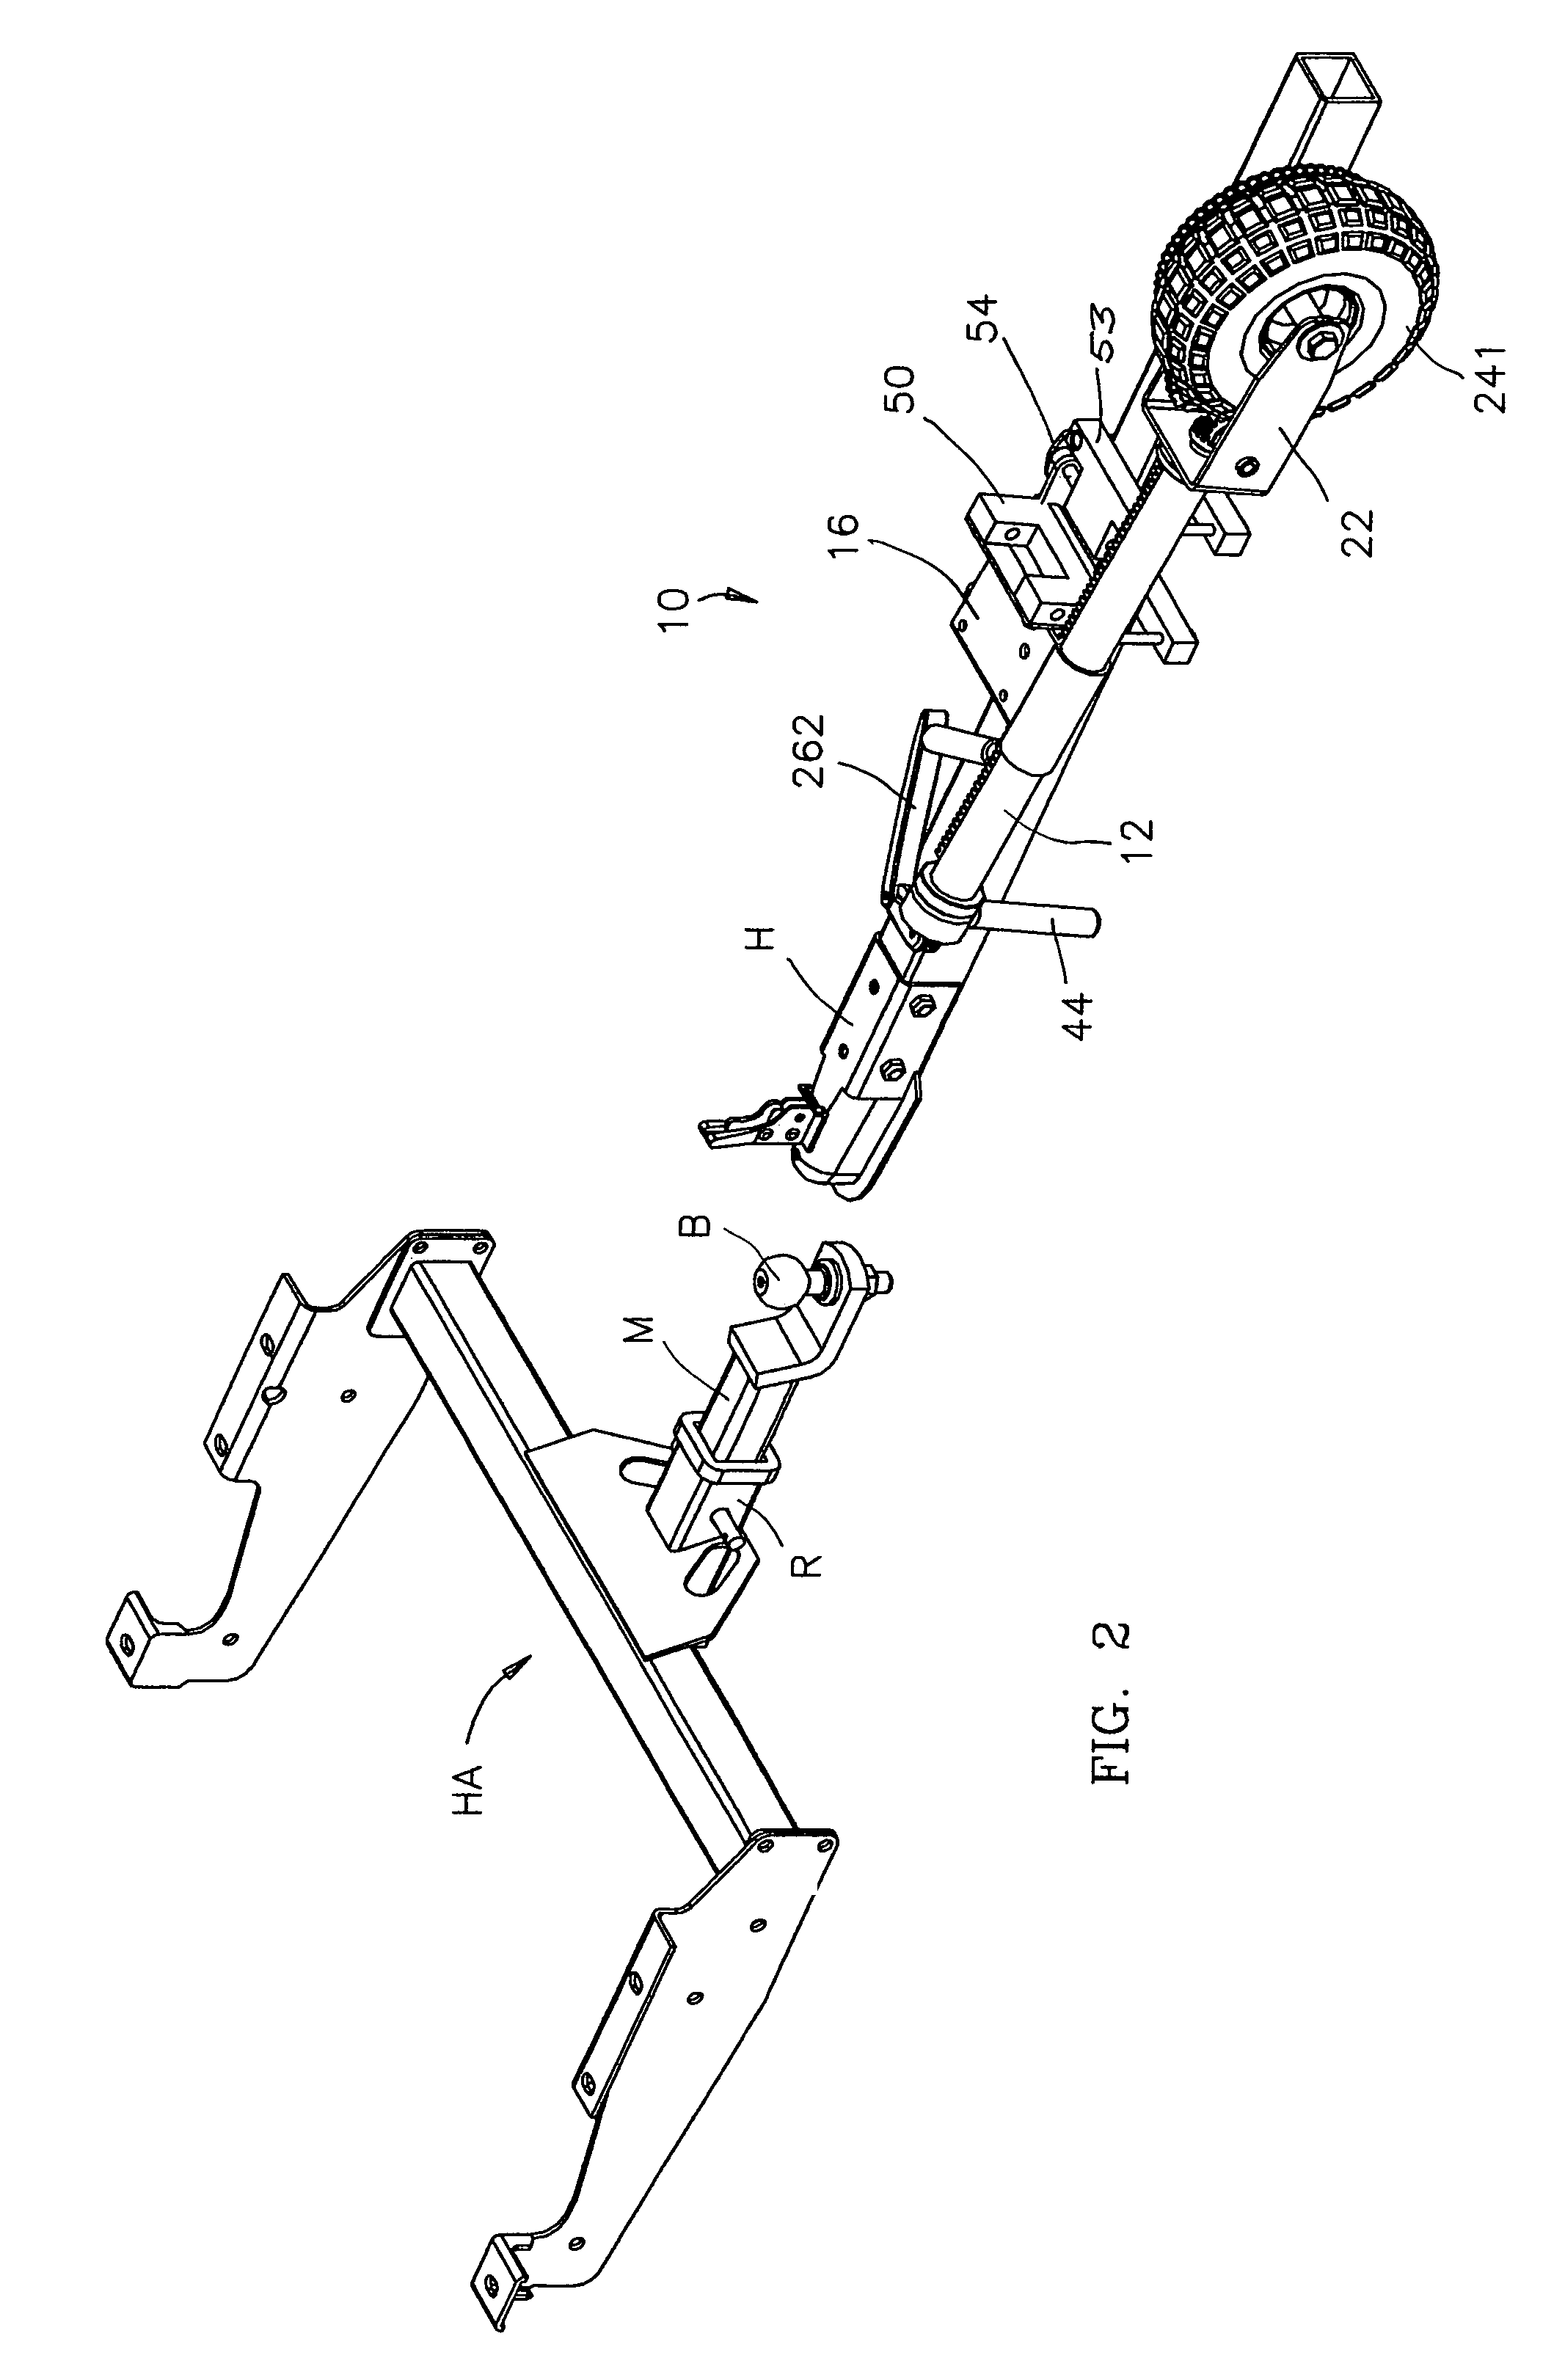 Powered maneuverable and retractable trailer jack device